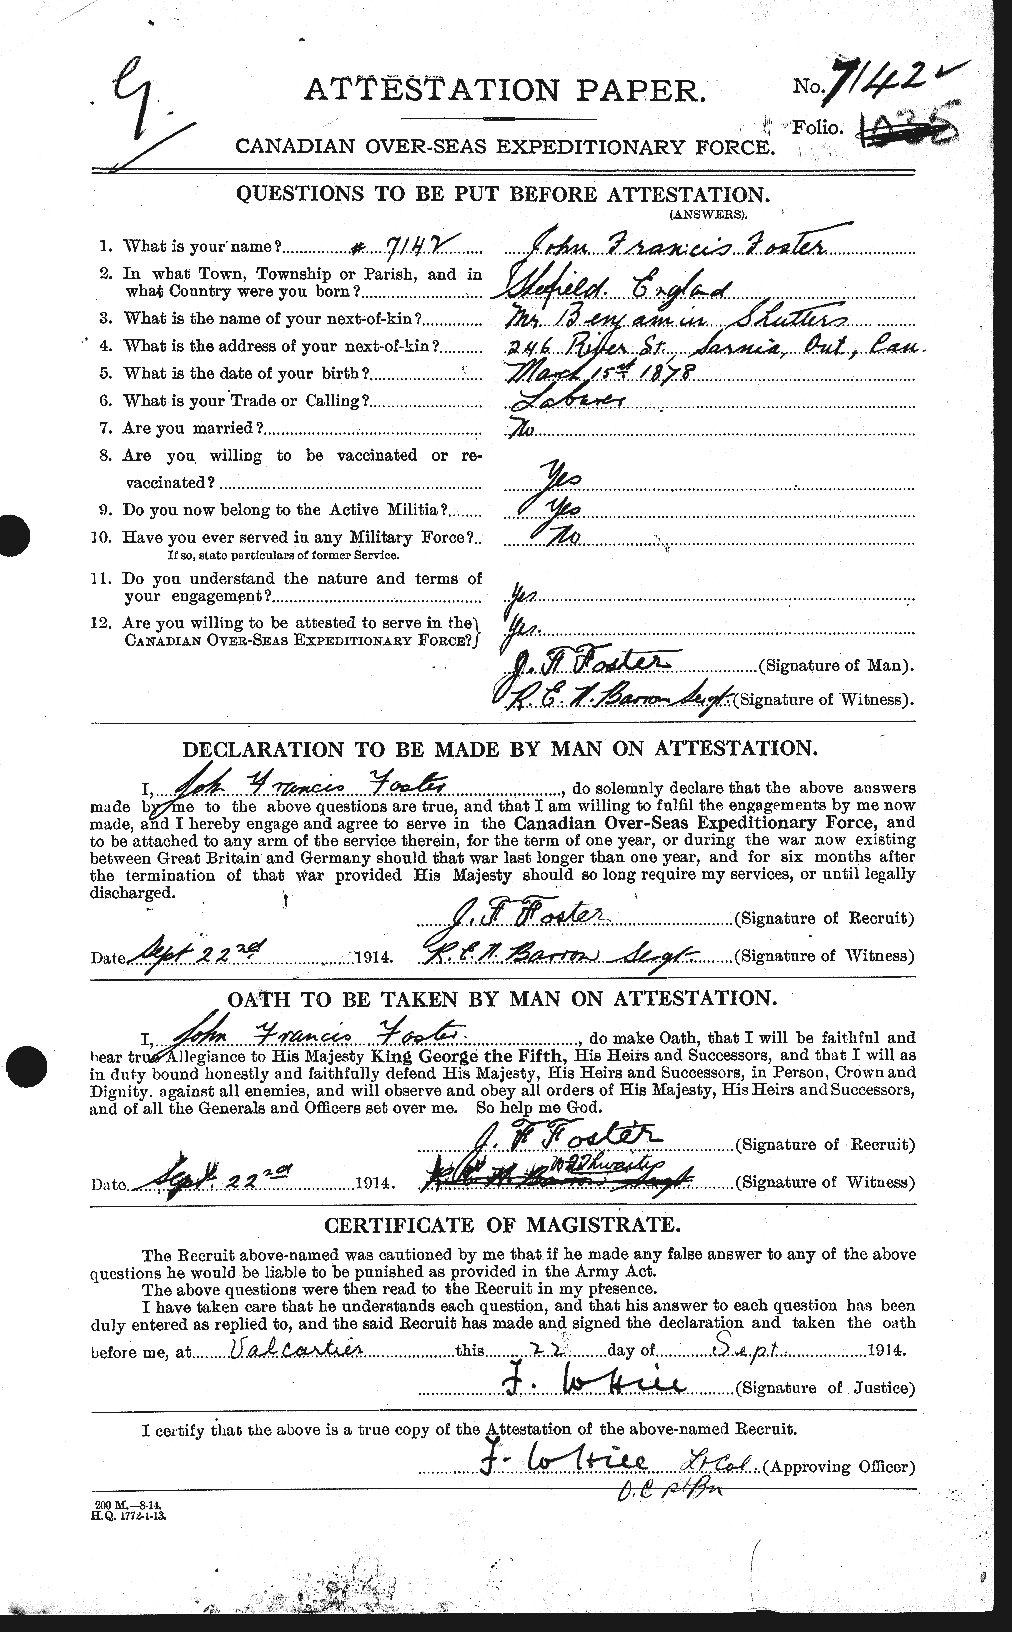 Personnel Records of the First World War - CEF 333359a